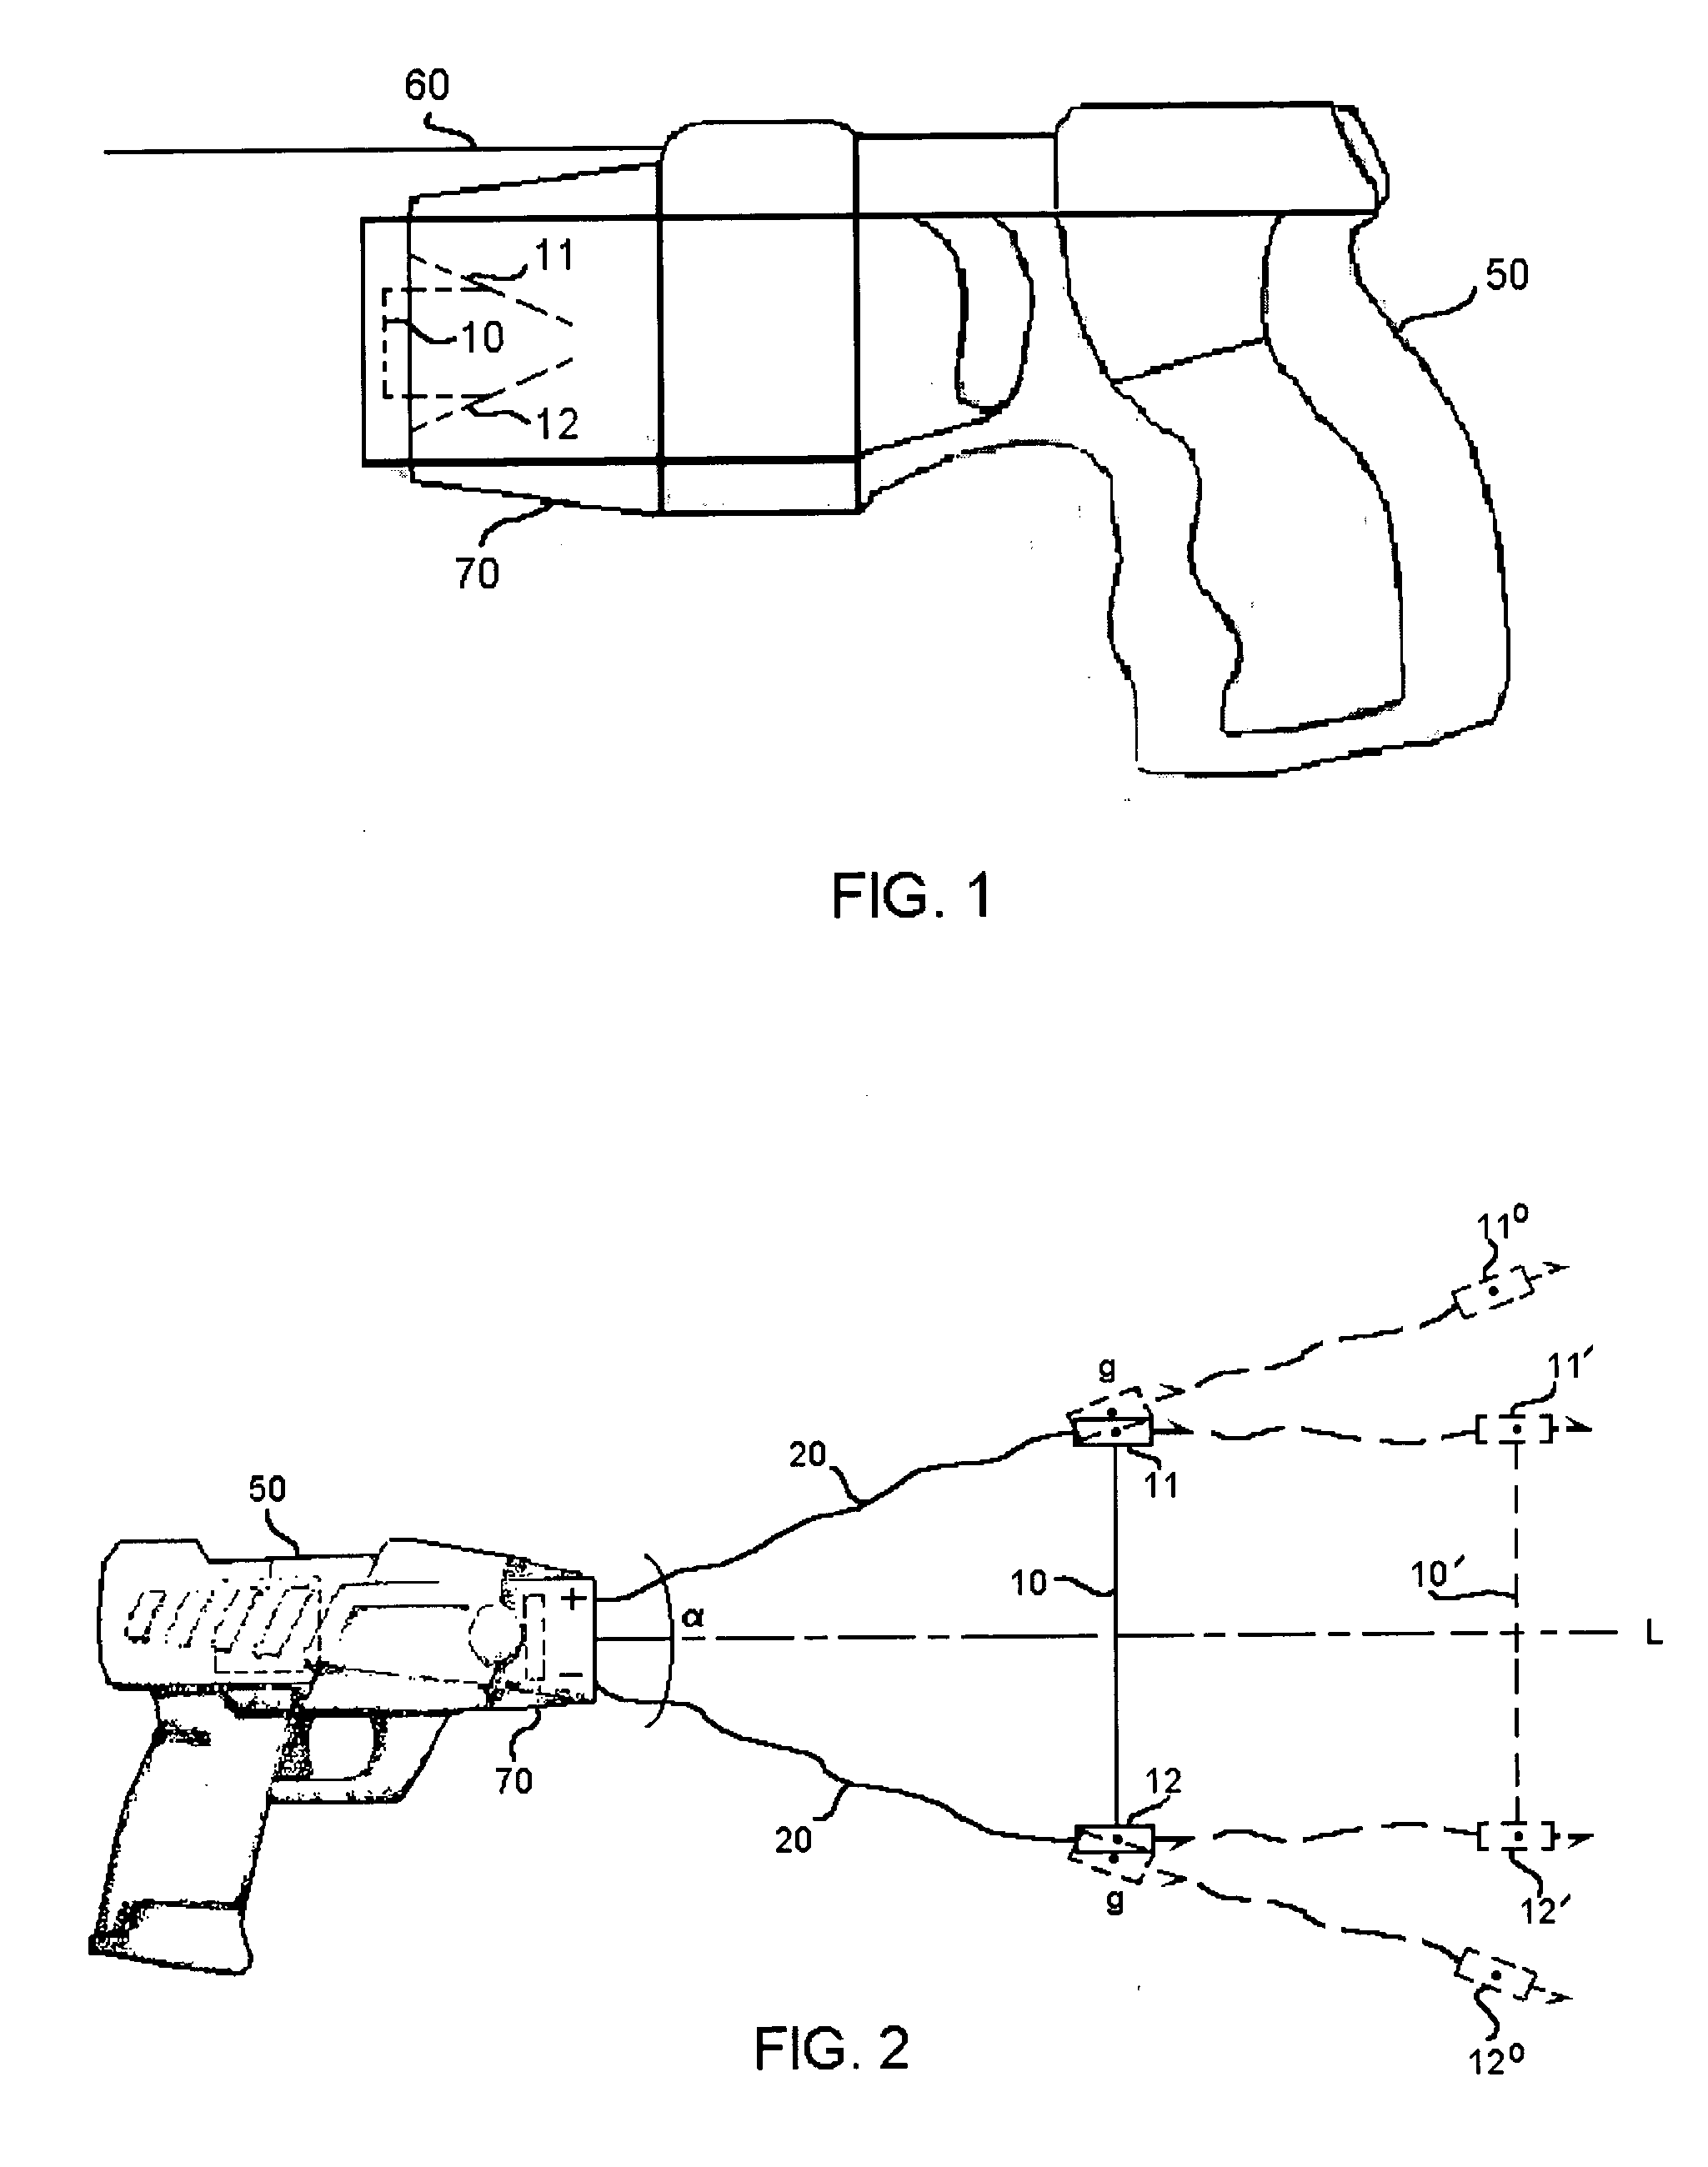 Electrical immobilization weapon